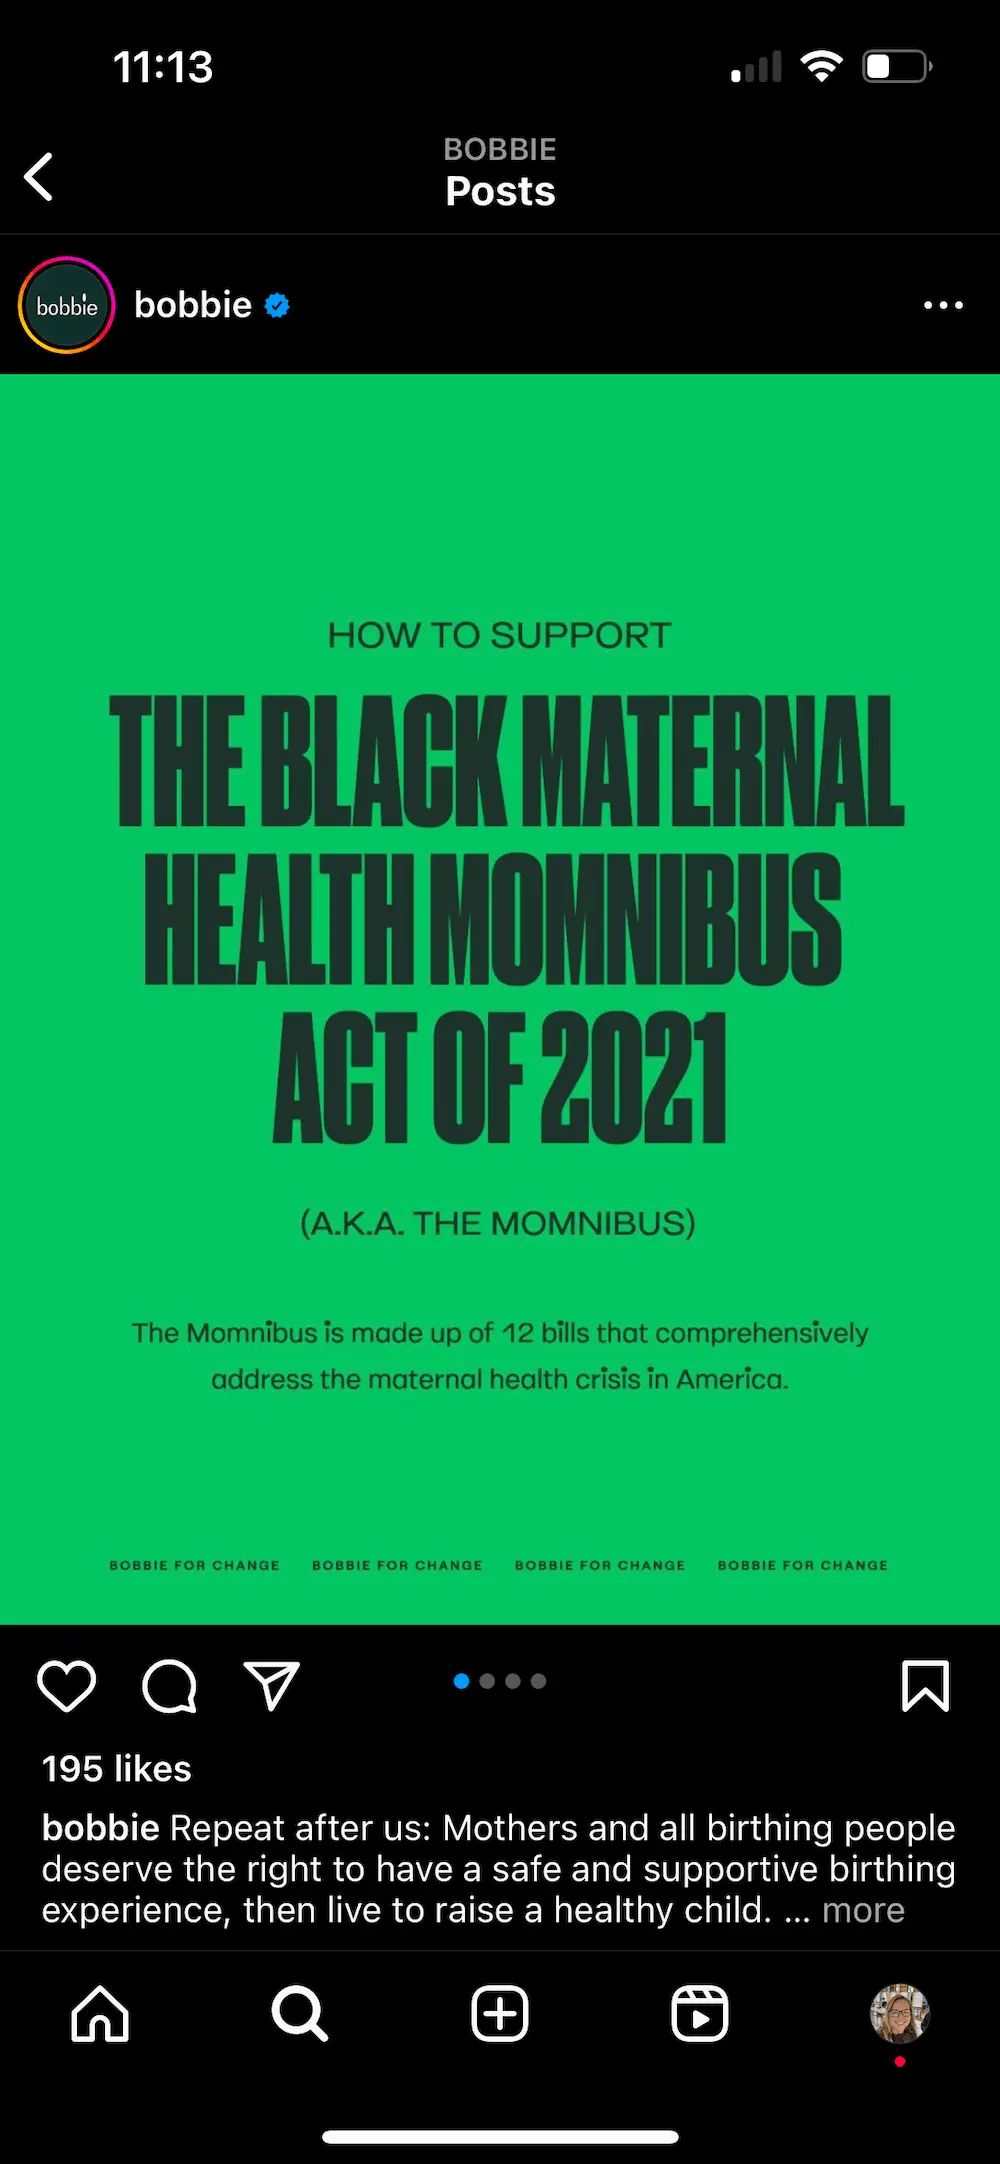 Image shows an Instagram post by Bobbie indicating how to support black maternal health bills